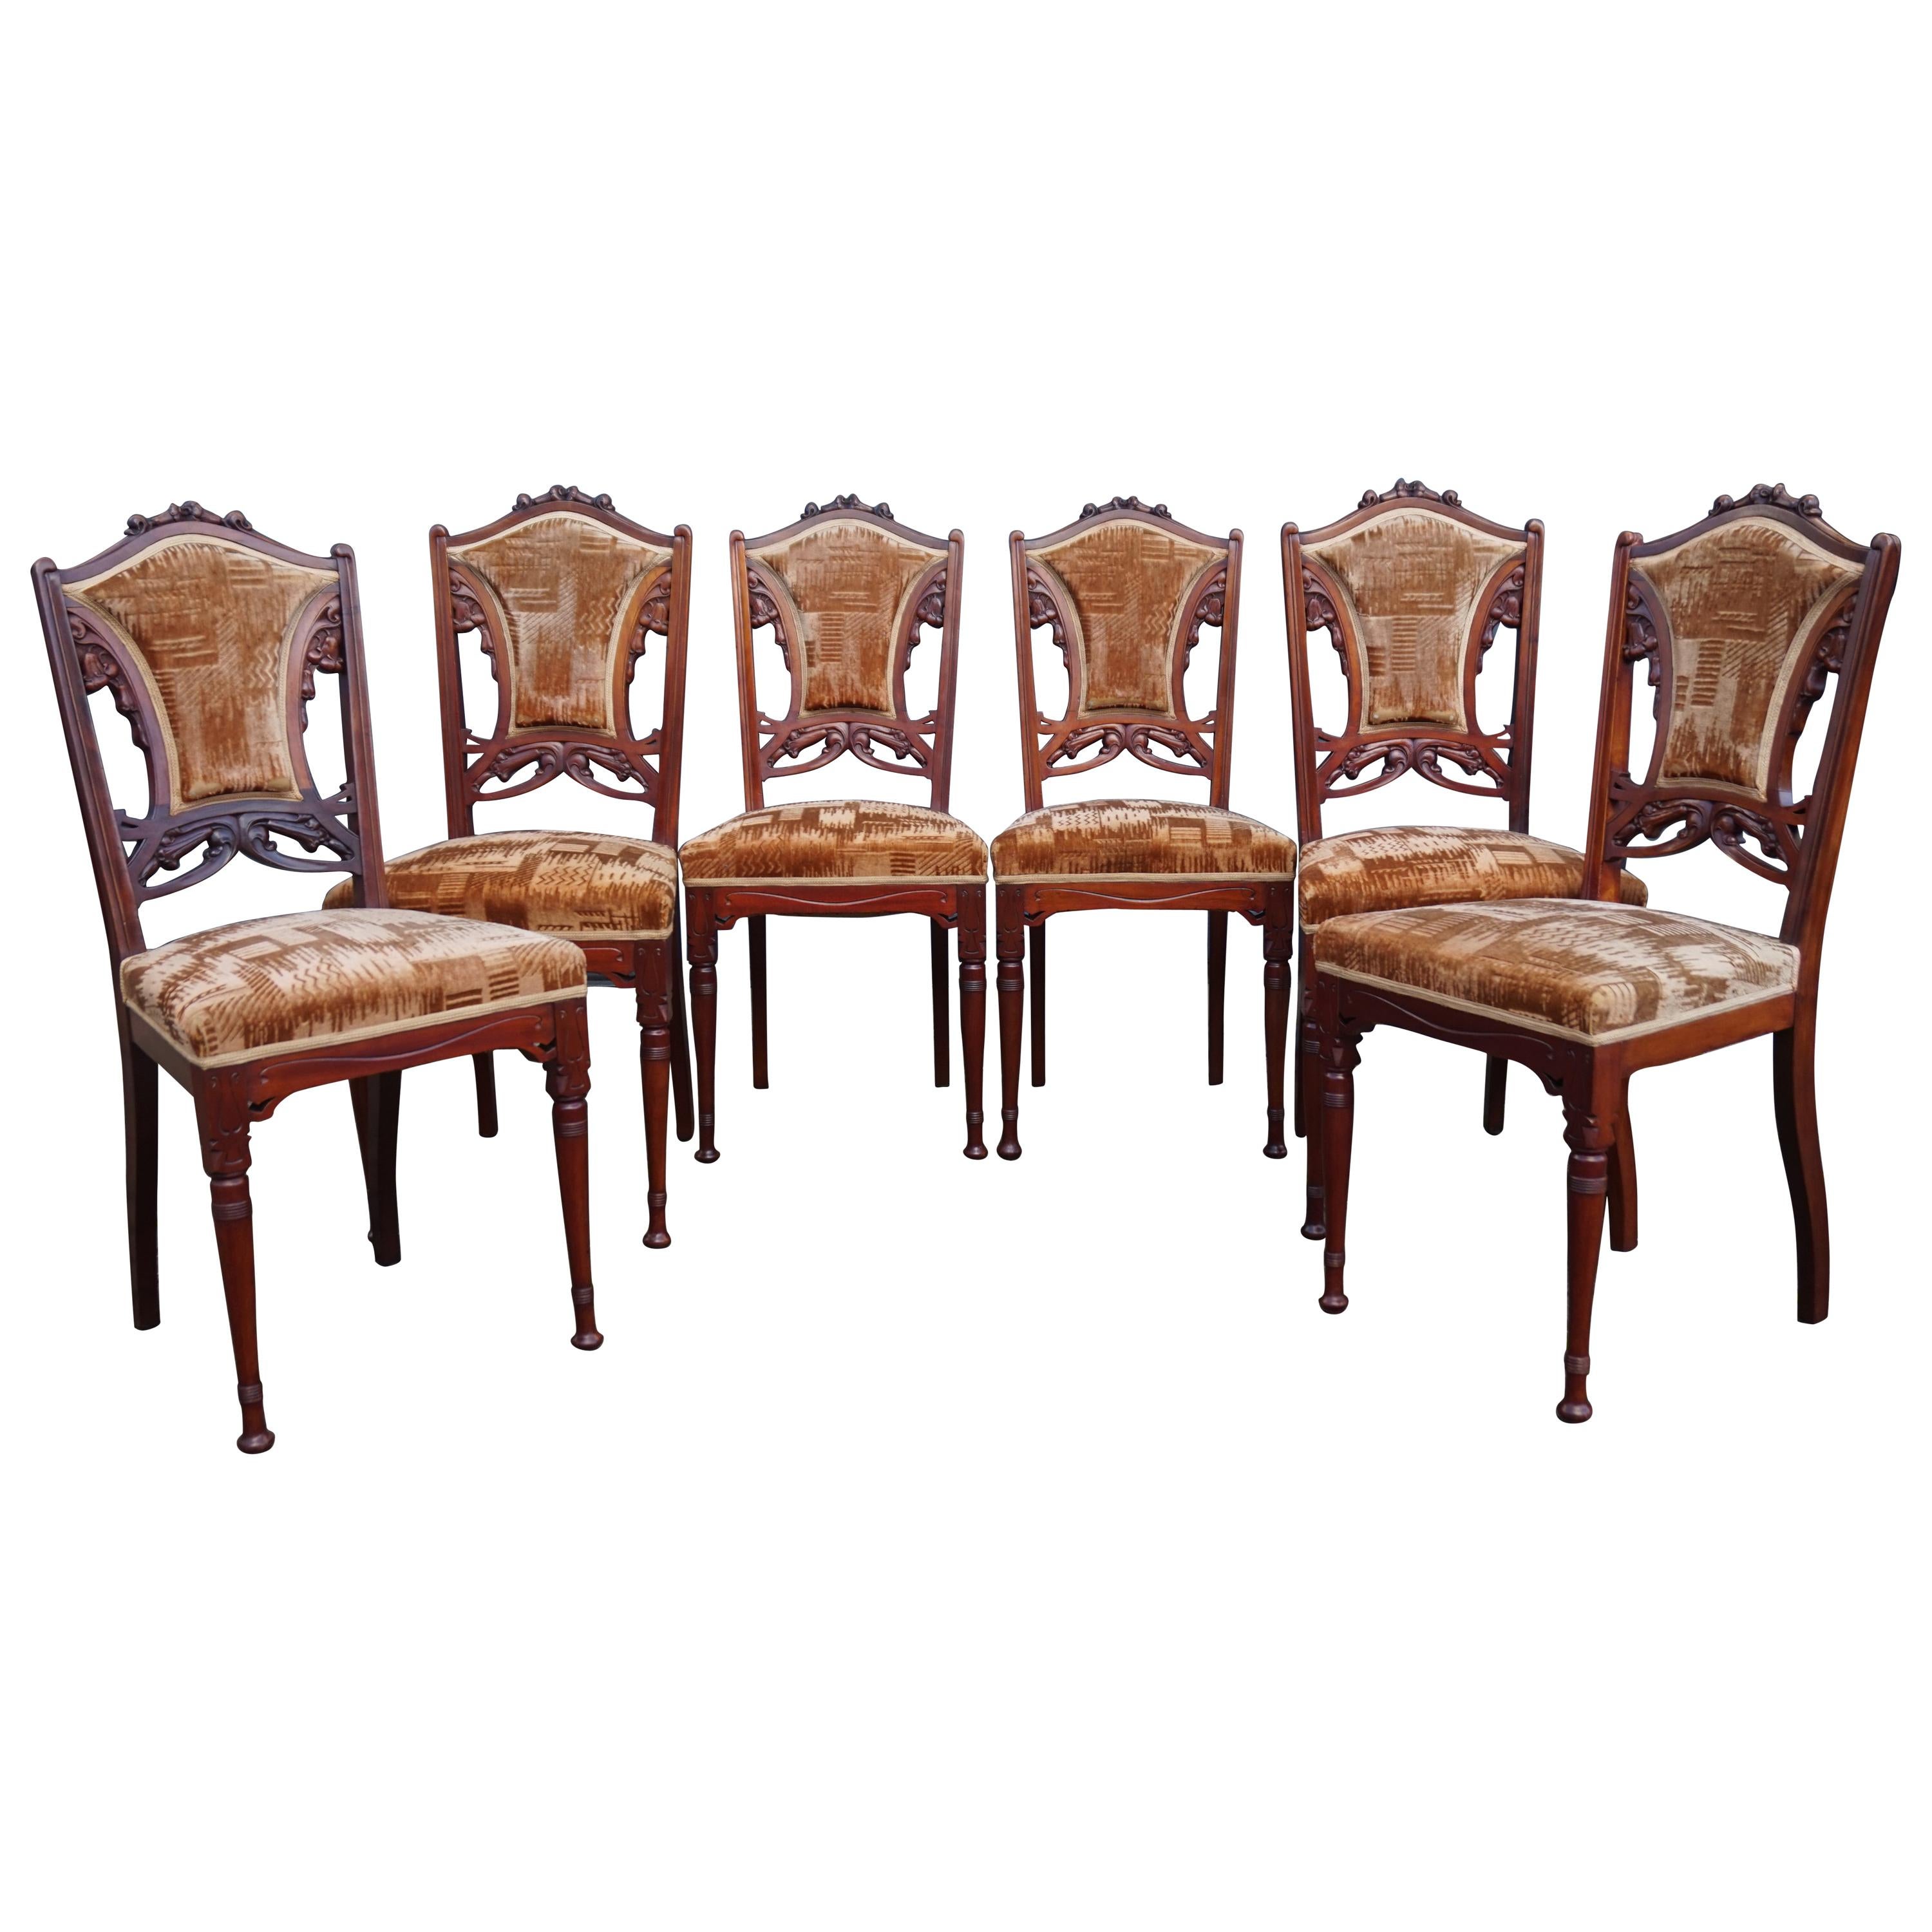 Set of Six Hand Carved Nutwood Arts & Crafts Dining Room Chairs with Upholstery